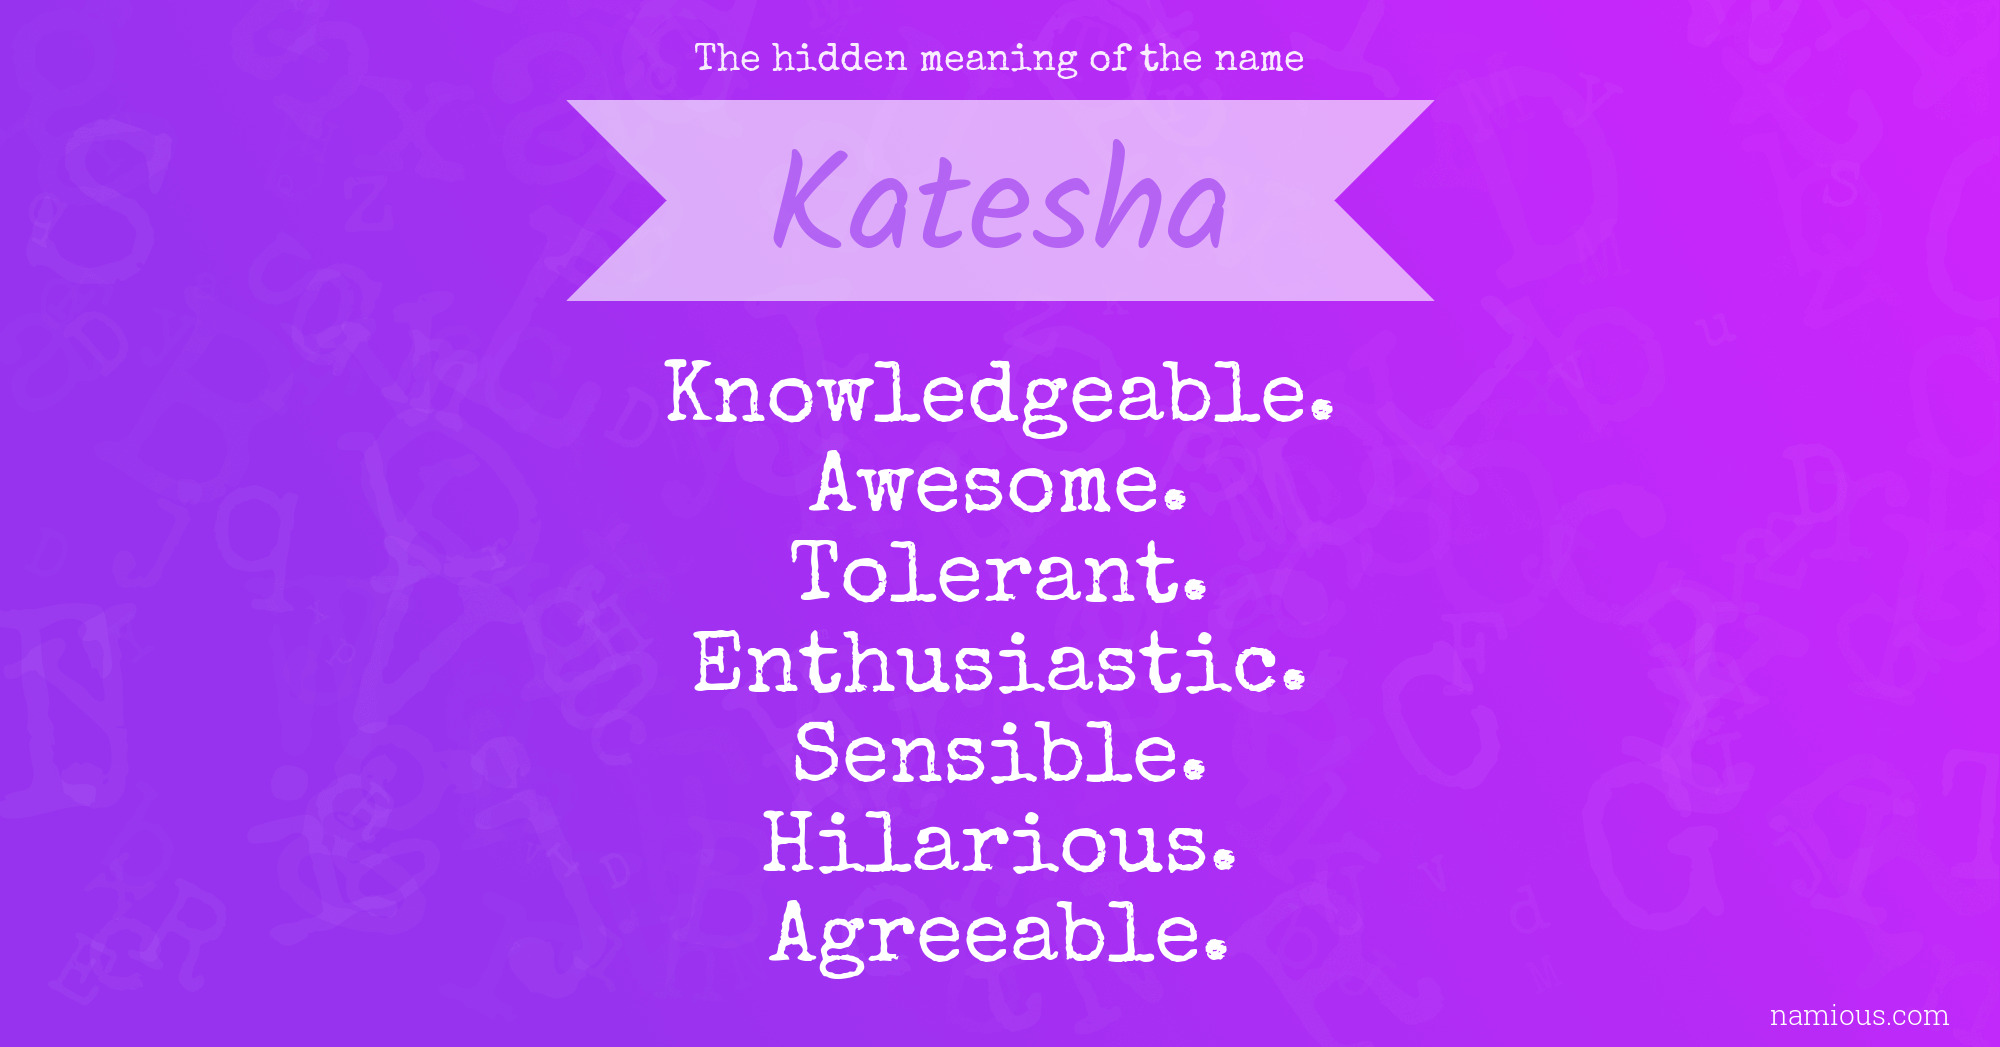 The hidden meaning of the name Katesha